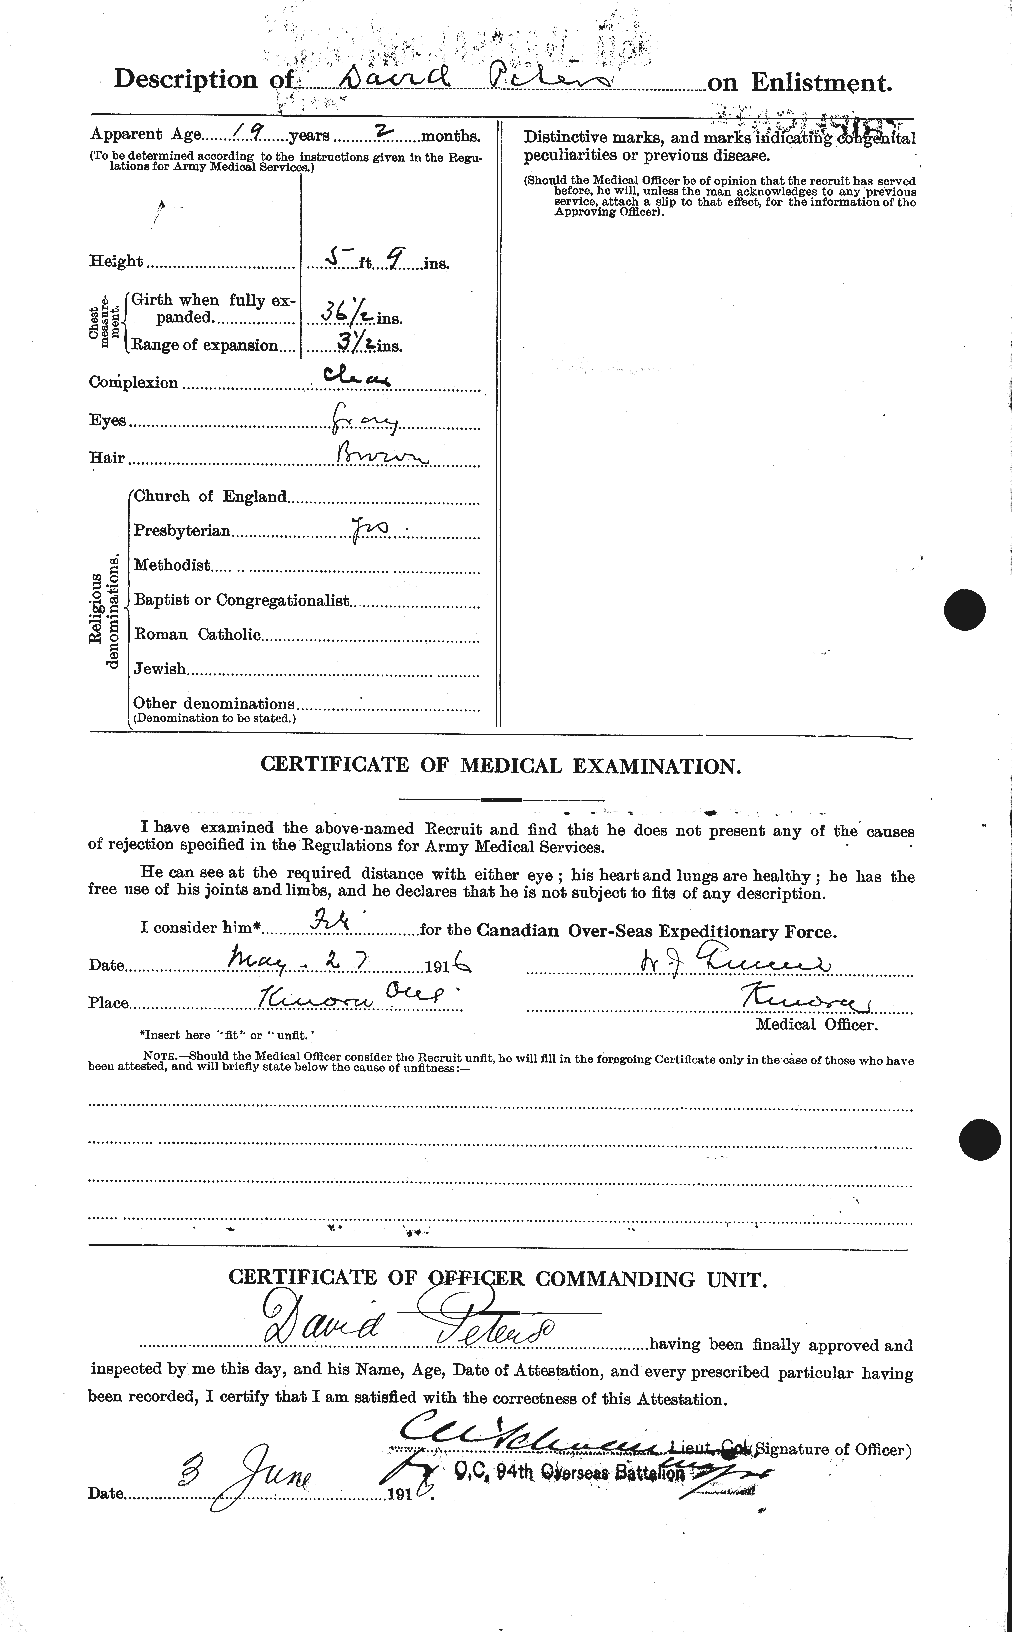 Personnel Records of the First World War - CEF 575387b